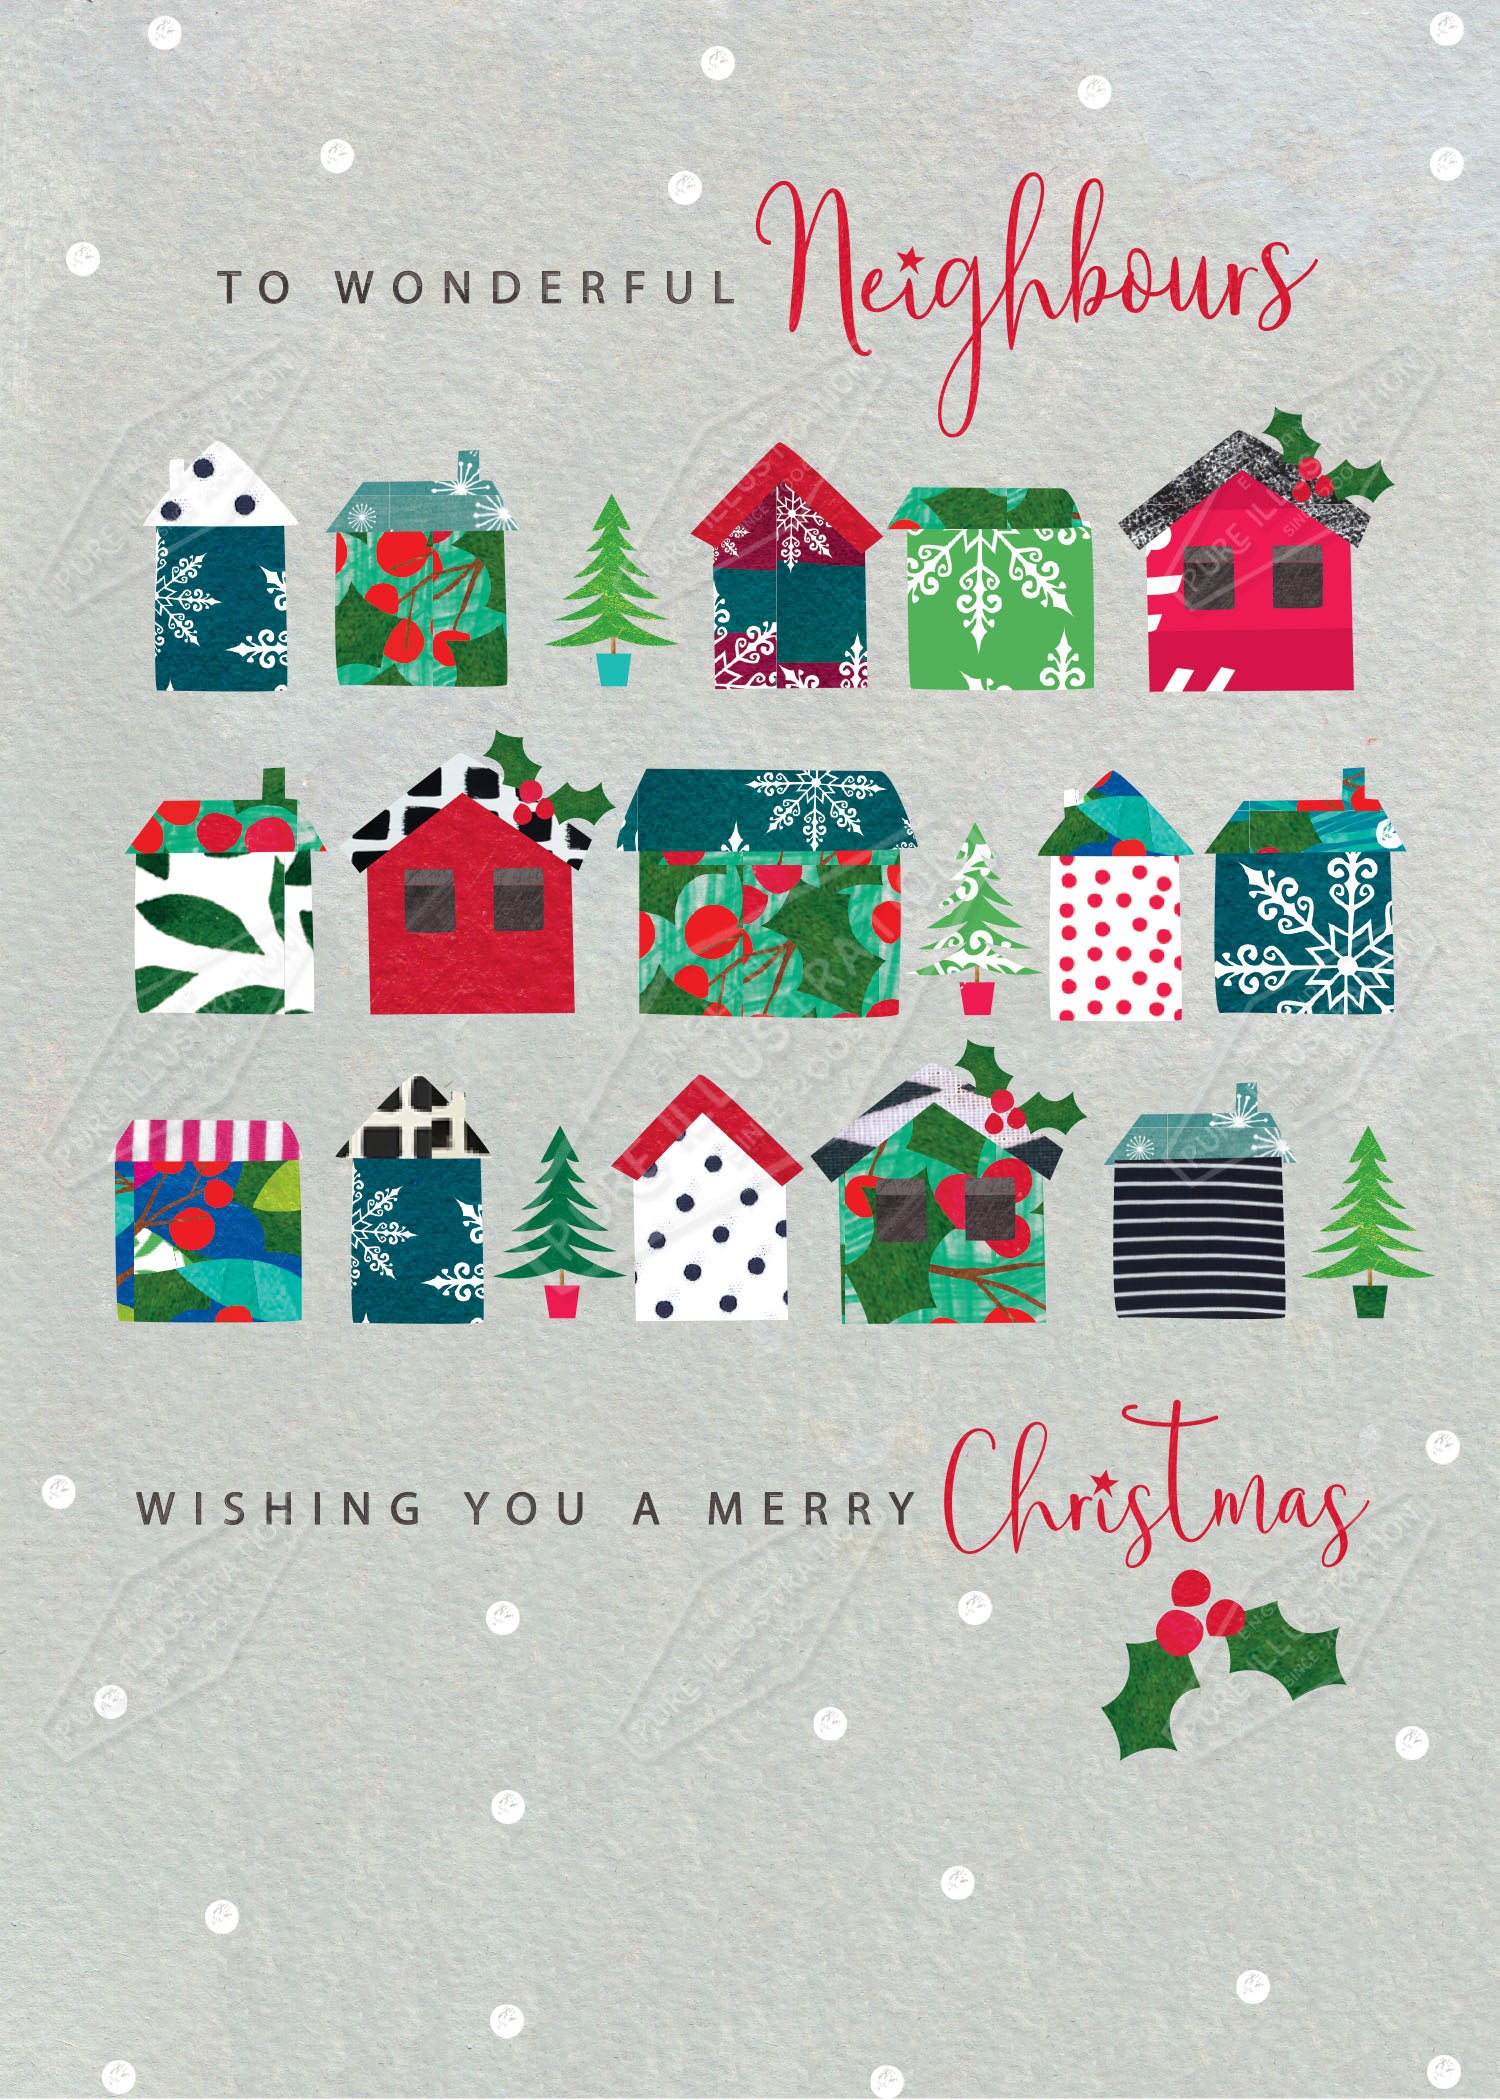 00035079IMC- Isla McDonald is represented by Pure Art Licensing Agency - Christmas Greeting Card Design